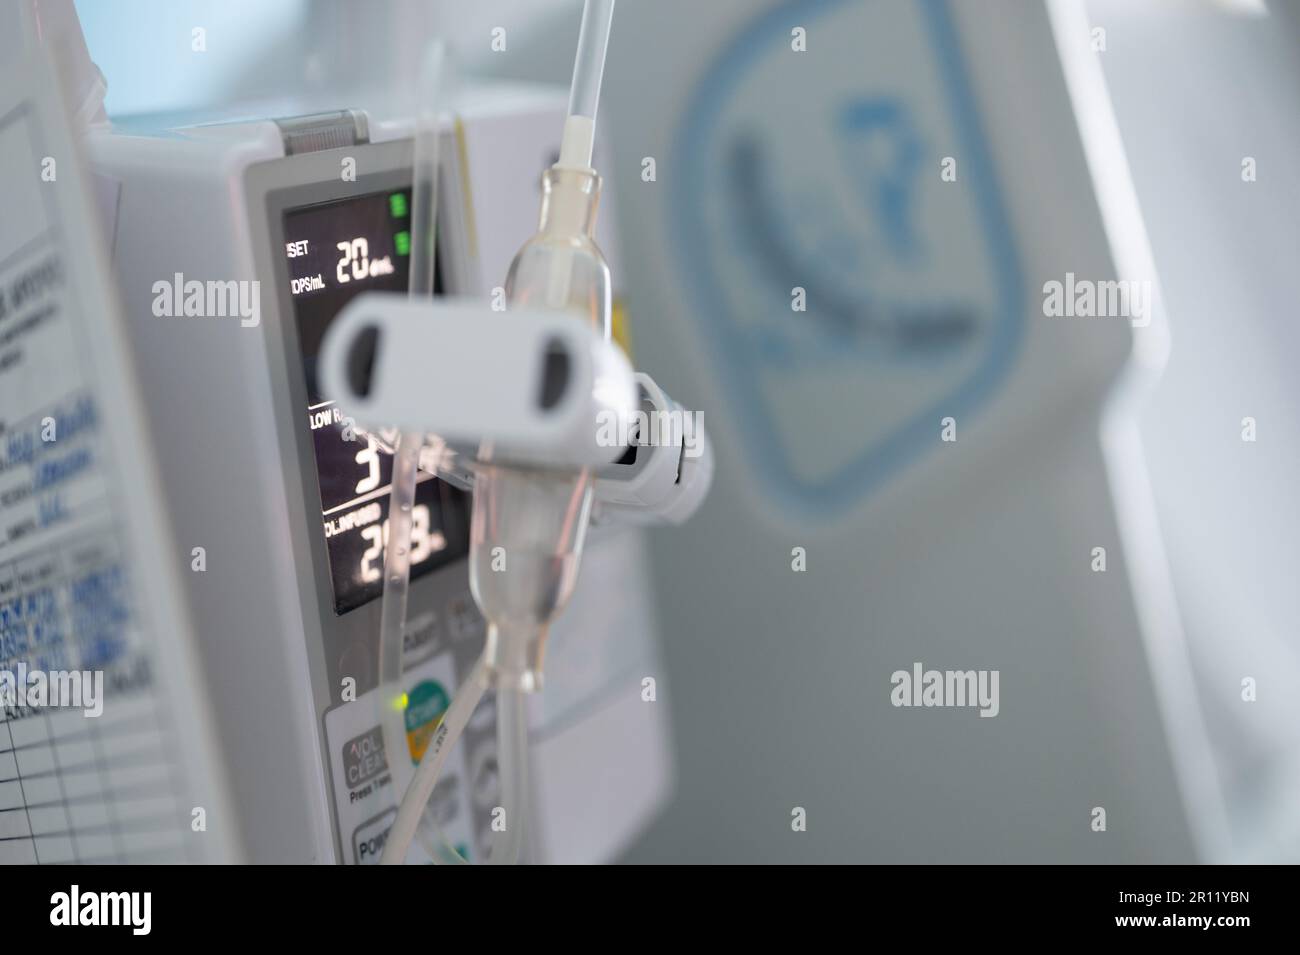 Medical drip iv device with pipe close up view Stock Photo